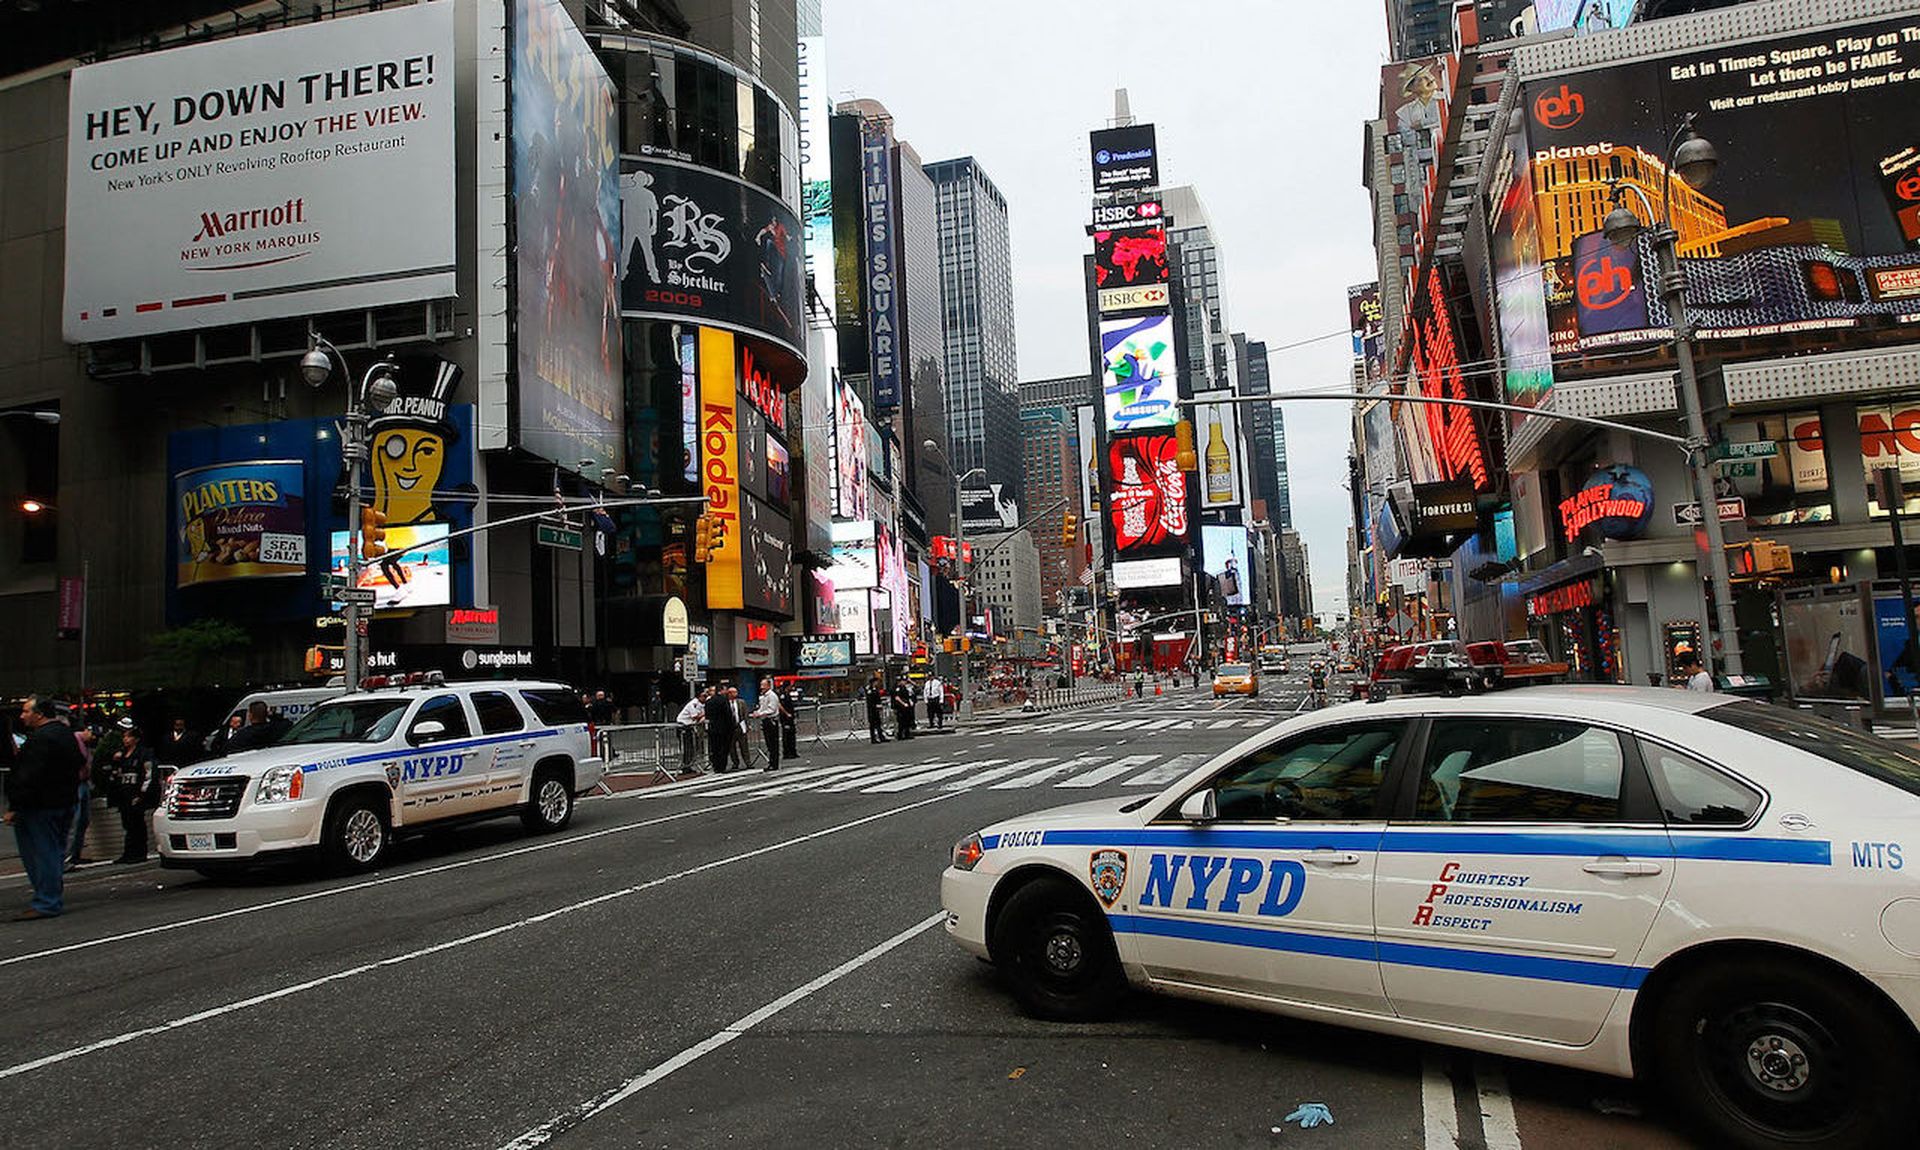 Police cruisers stand by at sunrise in Times Square May 2, 2010 in New York, New York. (Photo by Chris Hondros/Getty Images)